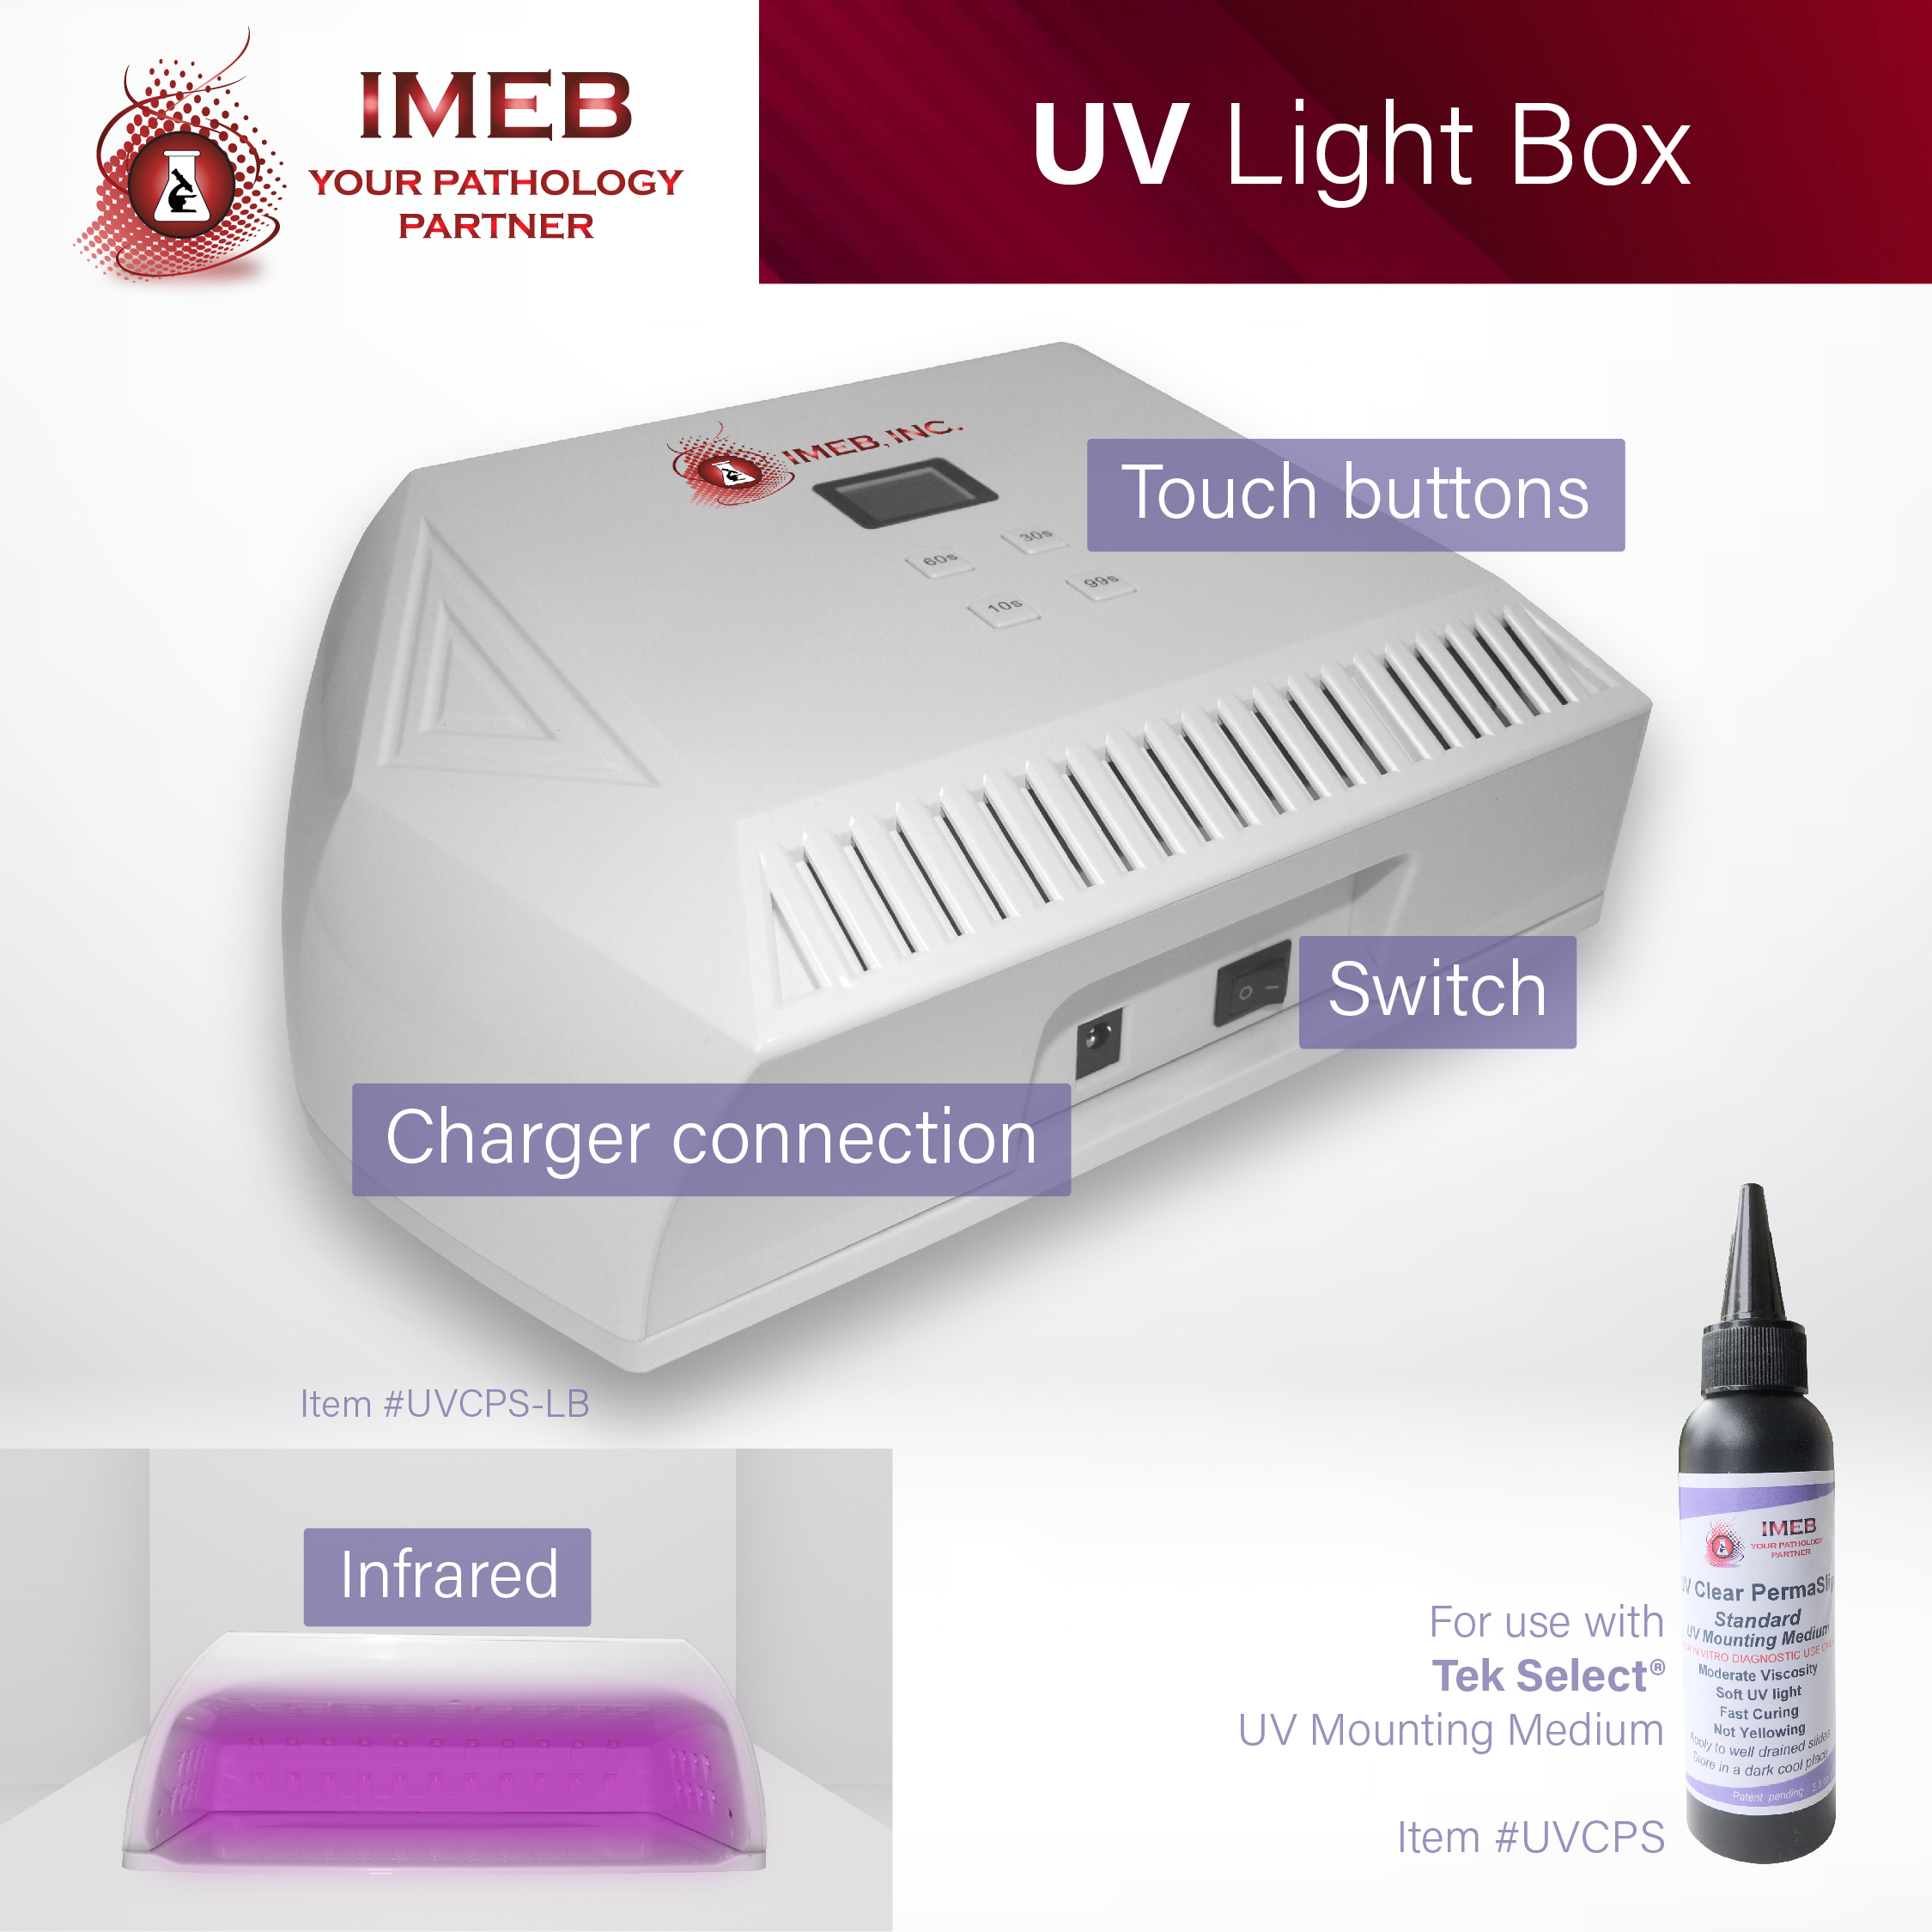 IMEB Inc UV Light Box Features Charger connection, switch, touch buttons, infrared, and for use with Tek Select UV Mounting Medium